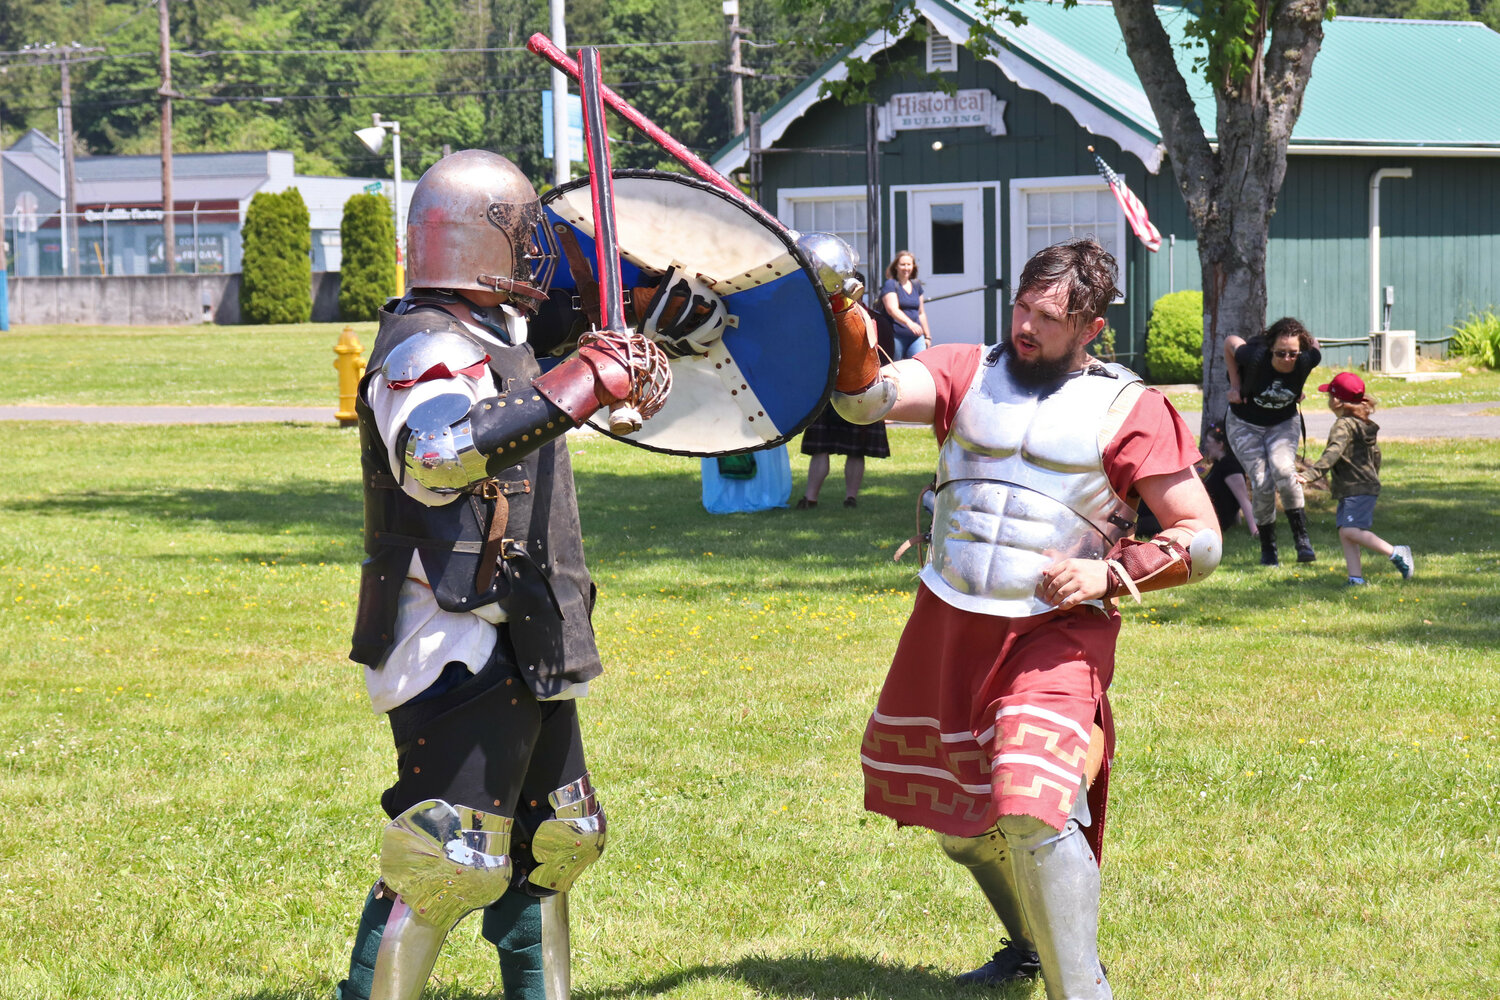 Live-action roleplayers “Palaminius” and “Alex” take part in a sword fighting demonstration on Saturday, May 27 during the Centralia Fantasy Festival at the Southwest Washington Fairgrounds in Chehalis.